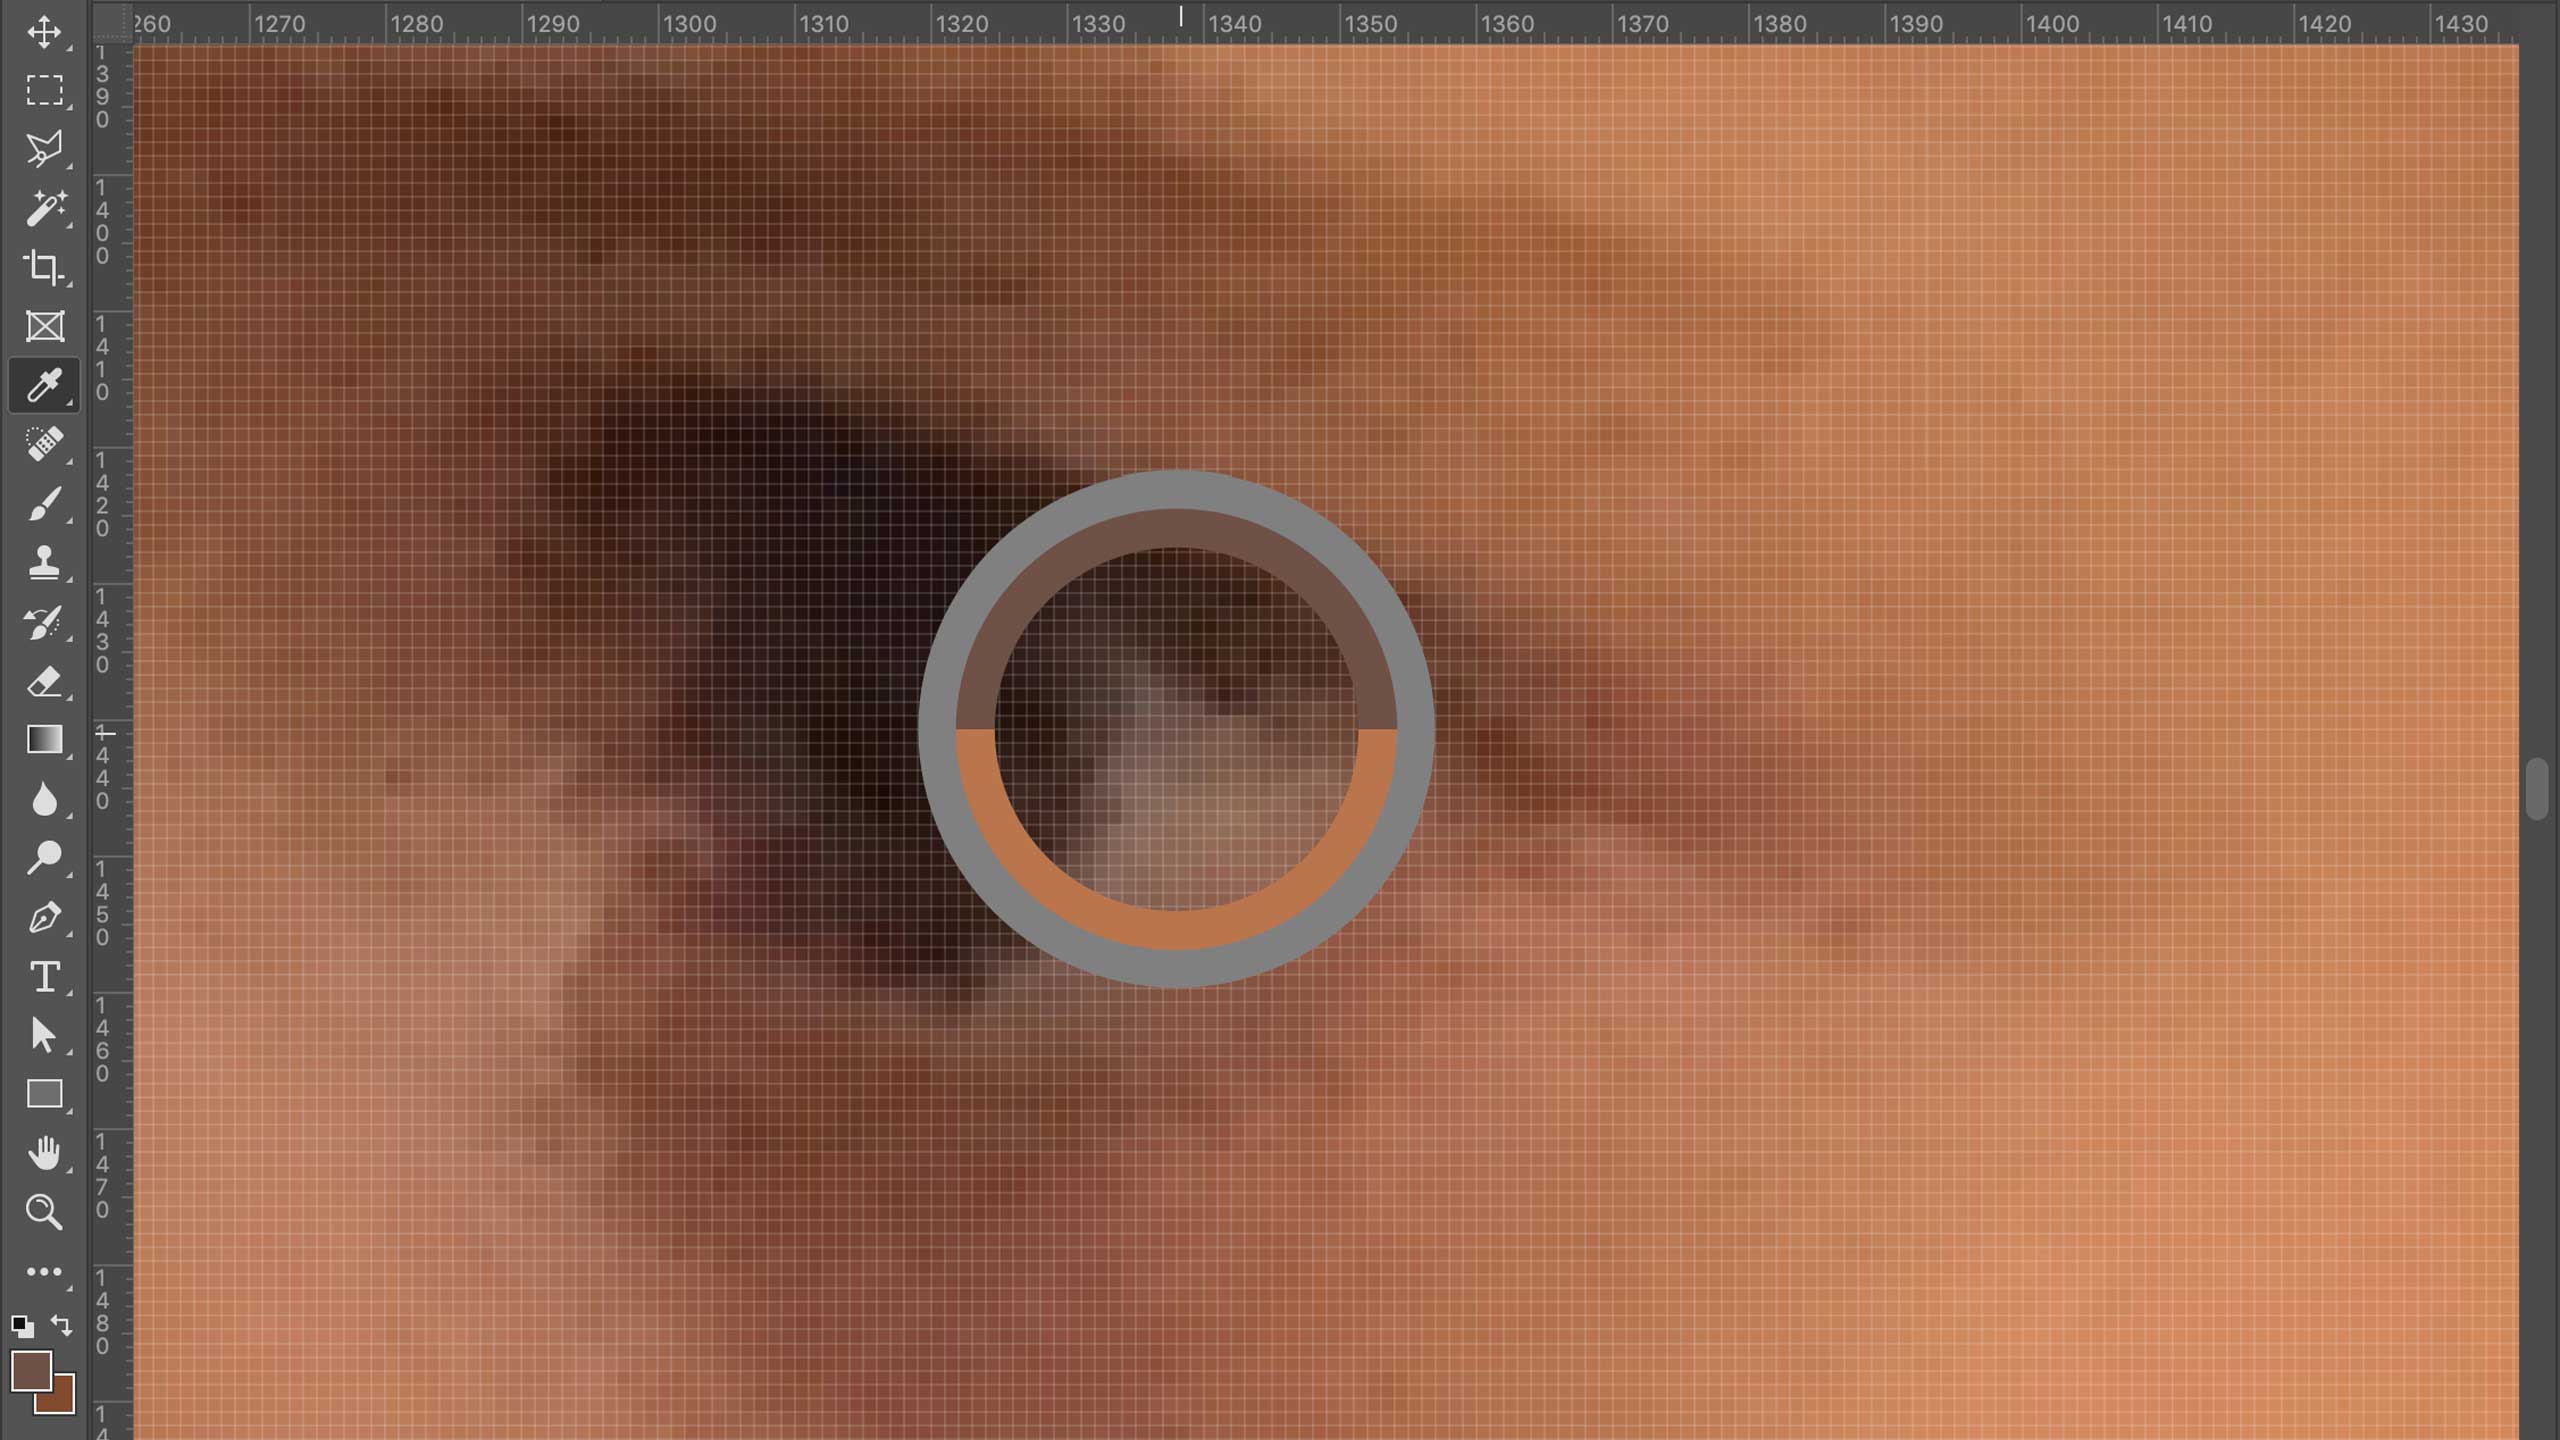 A target-like gray circle is focused over the child's eye